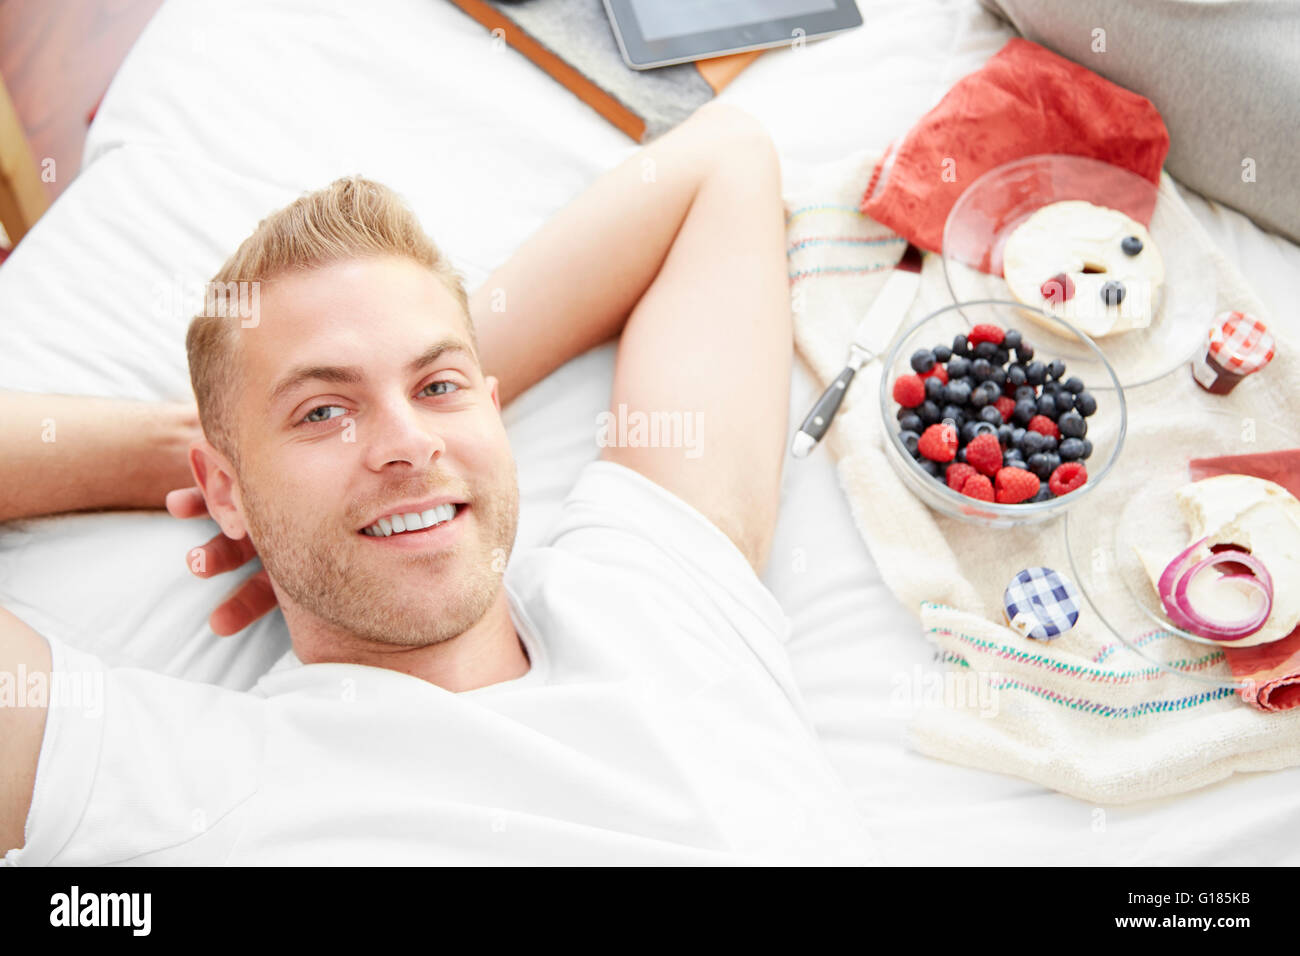 Man lying on bed, hands behind head looking at camera smiling Stock Photo